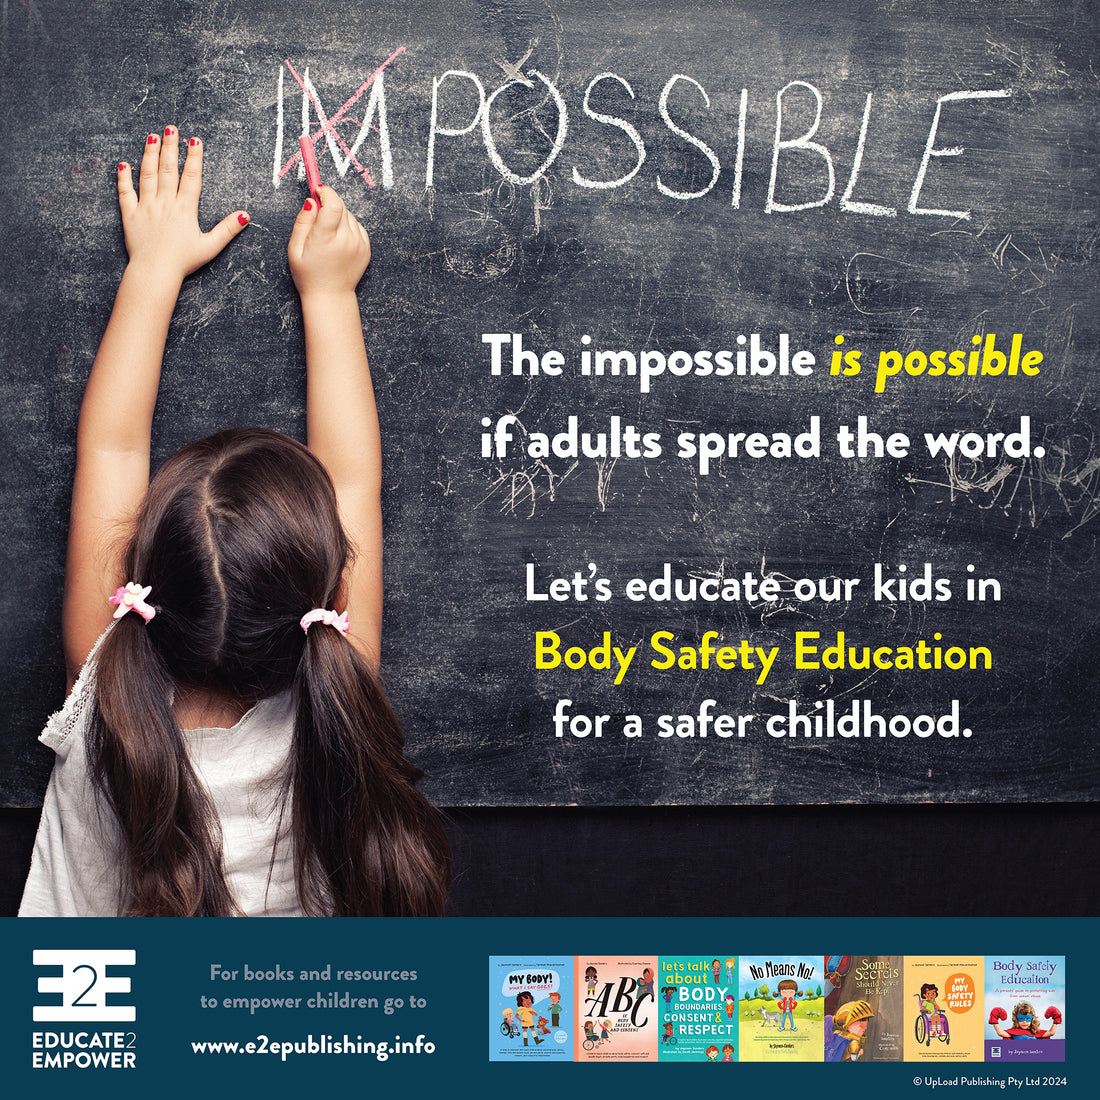 The impossible is possible if adults spread the word.